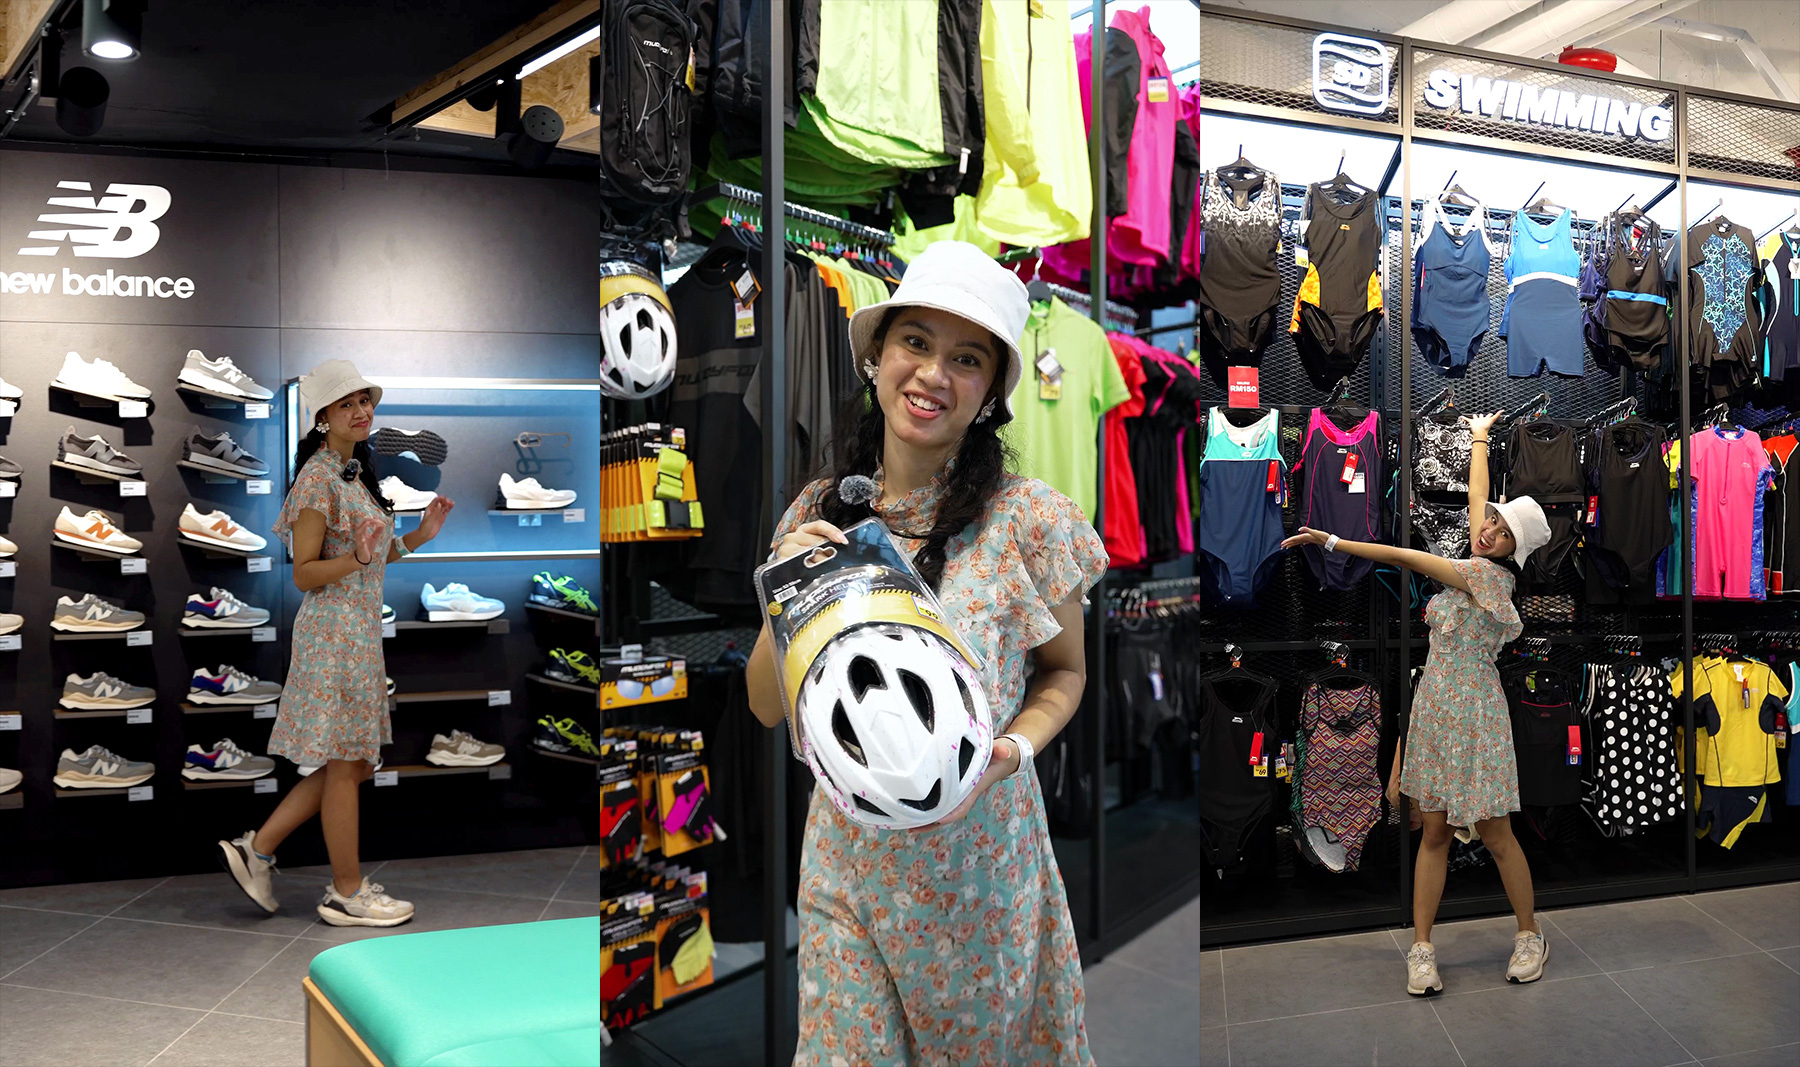 Gear up for training and pick up your sports attire from a range of activewear shops in Sunway Pyramid such as JD Sports